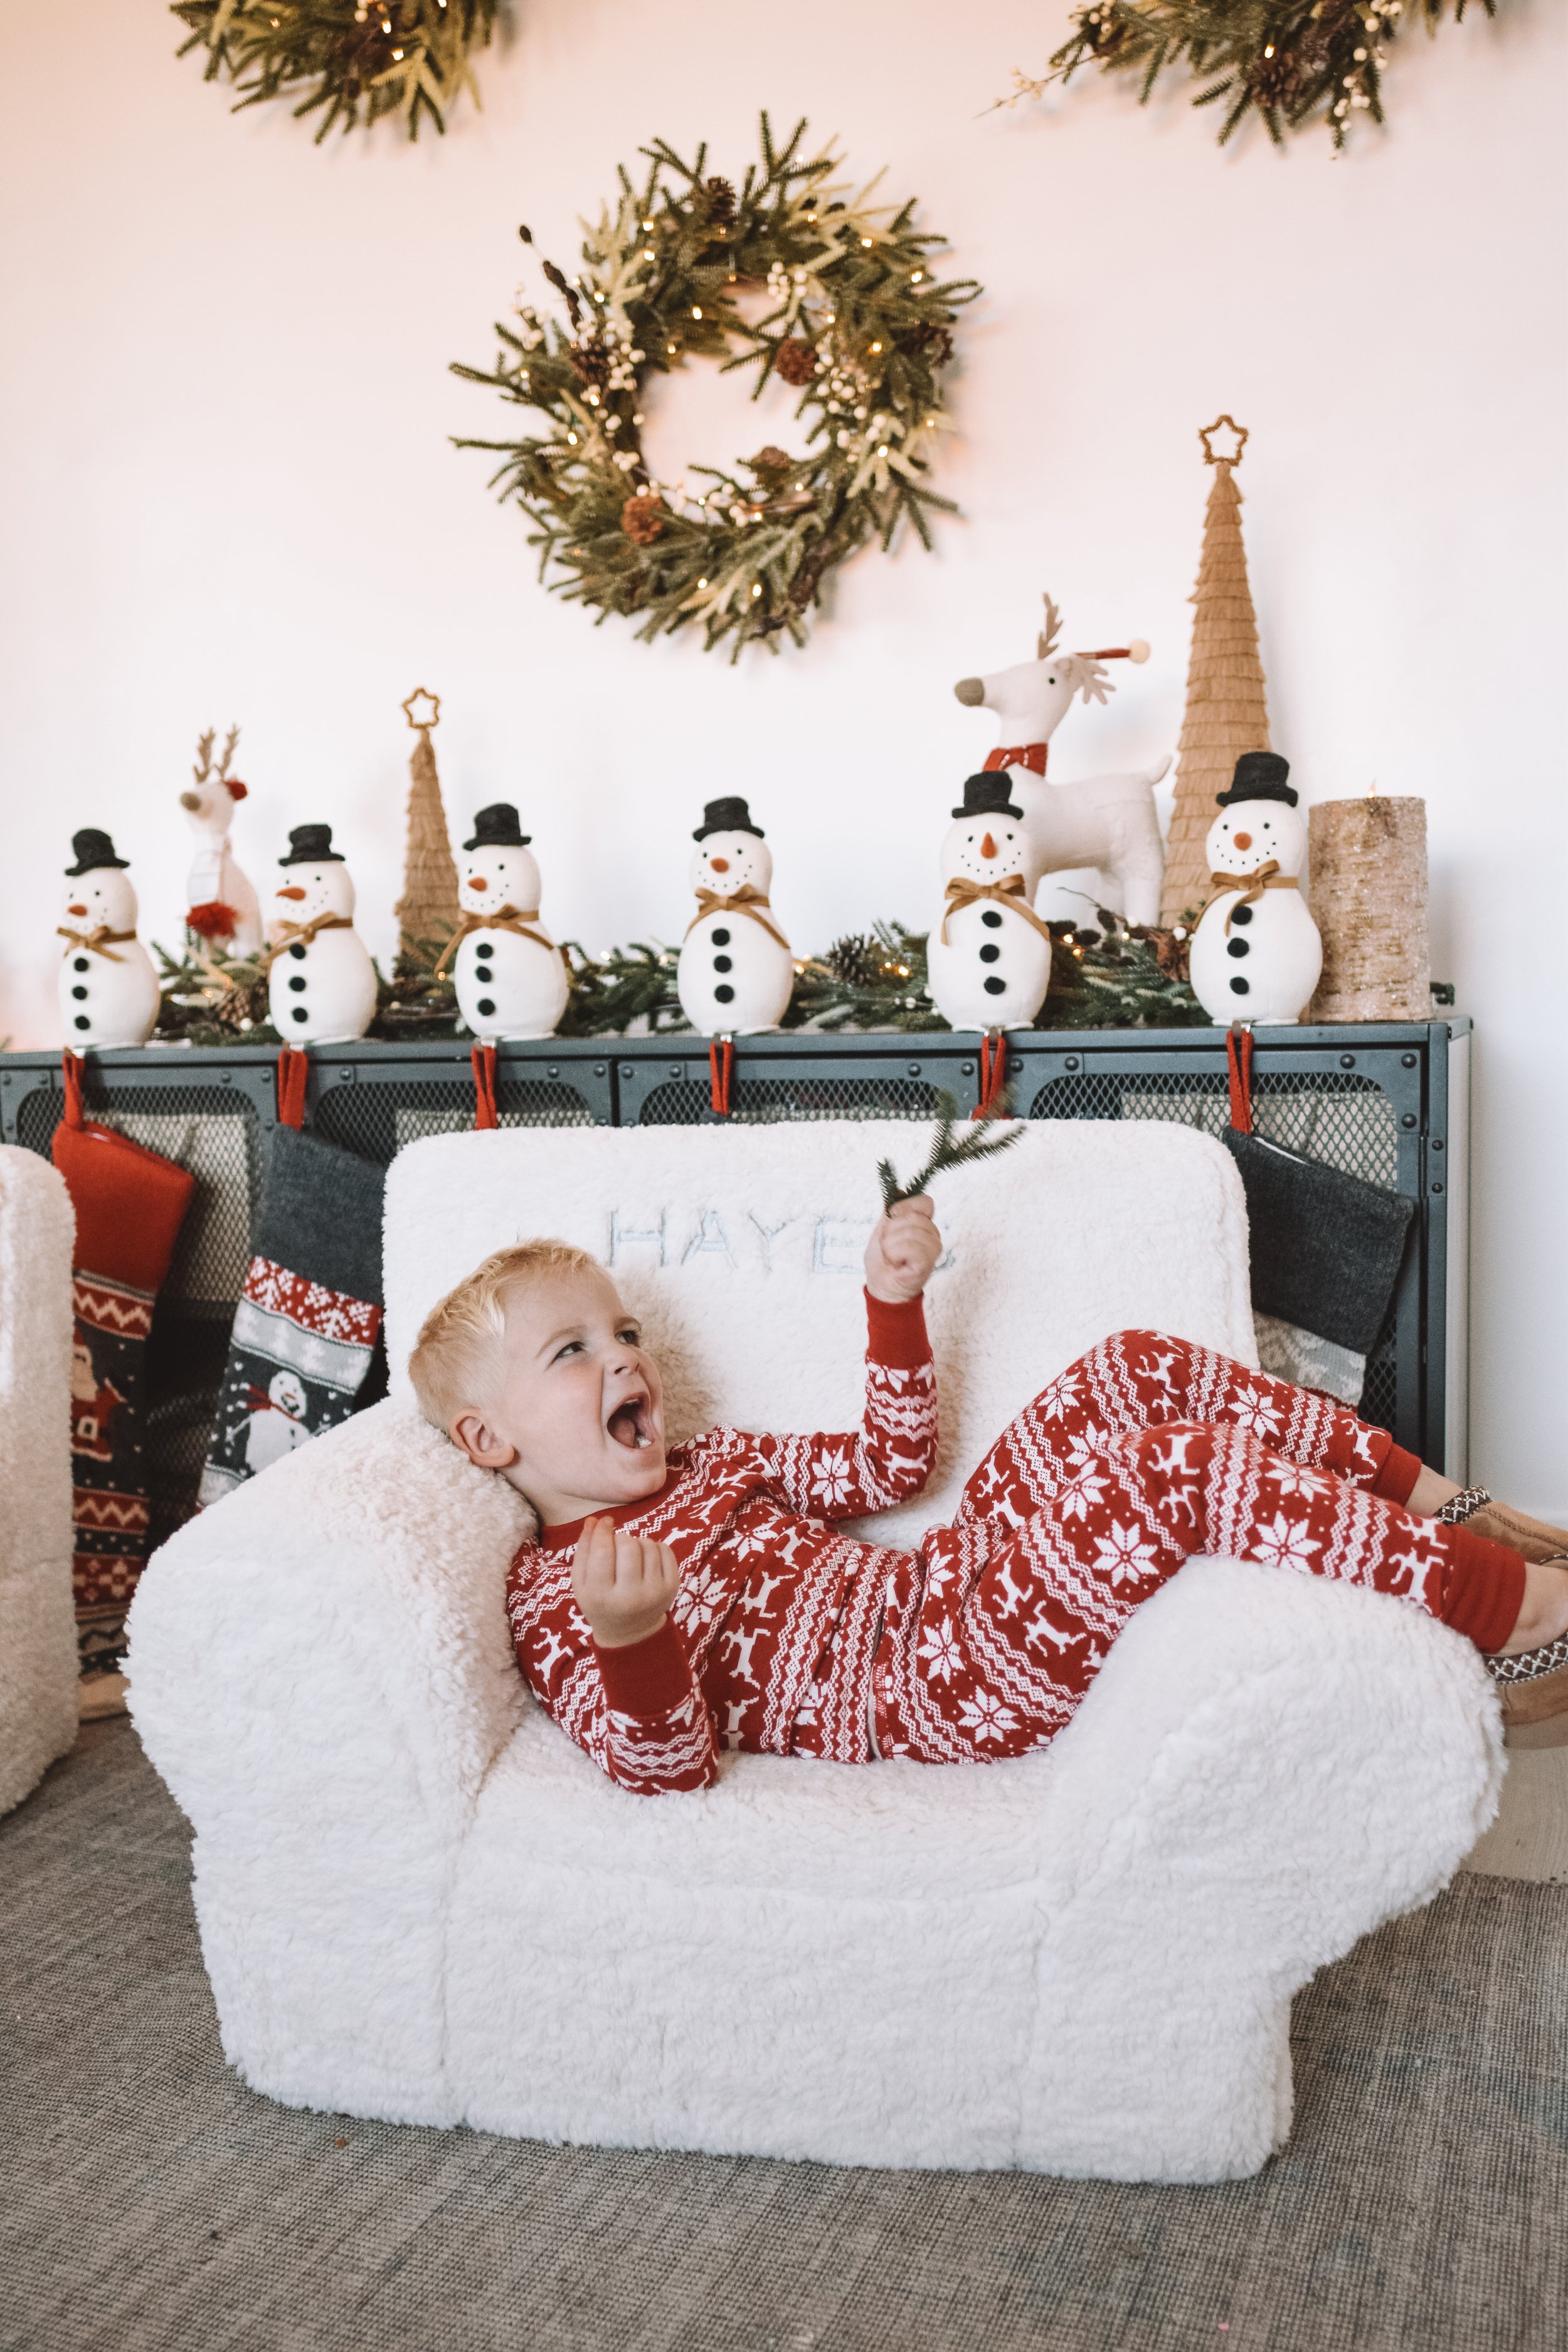 Kids Holiday Gift Ideas